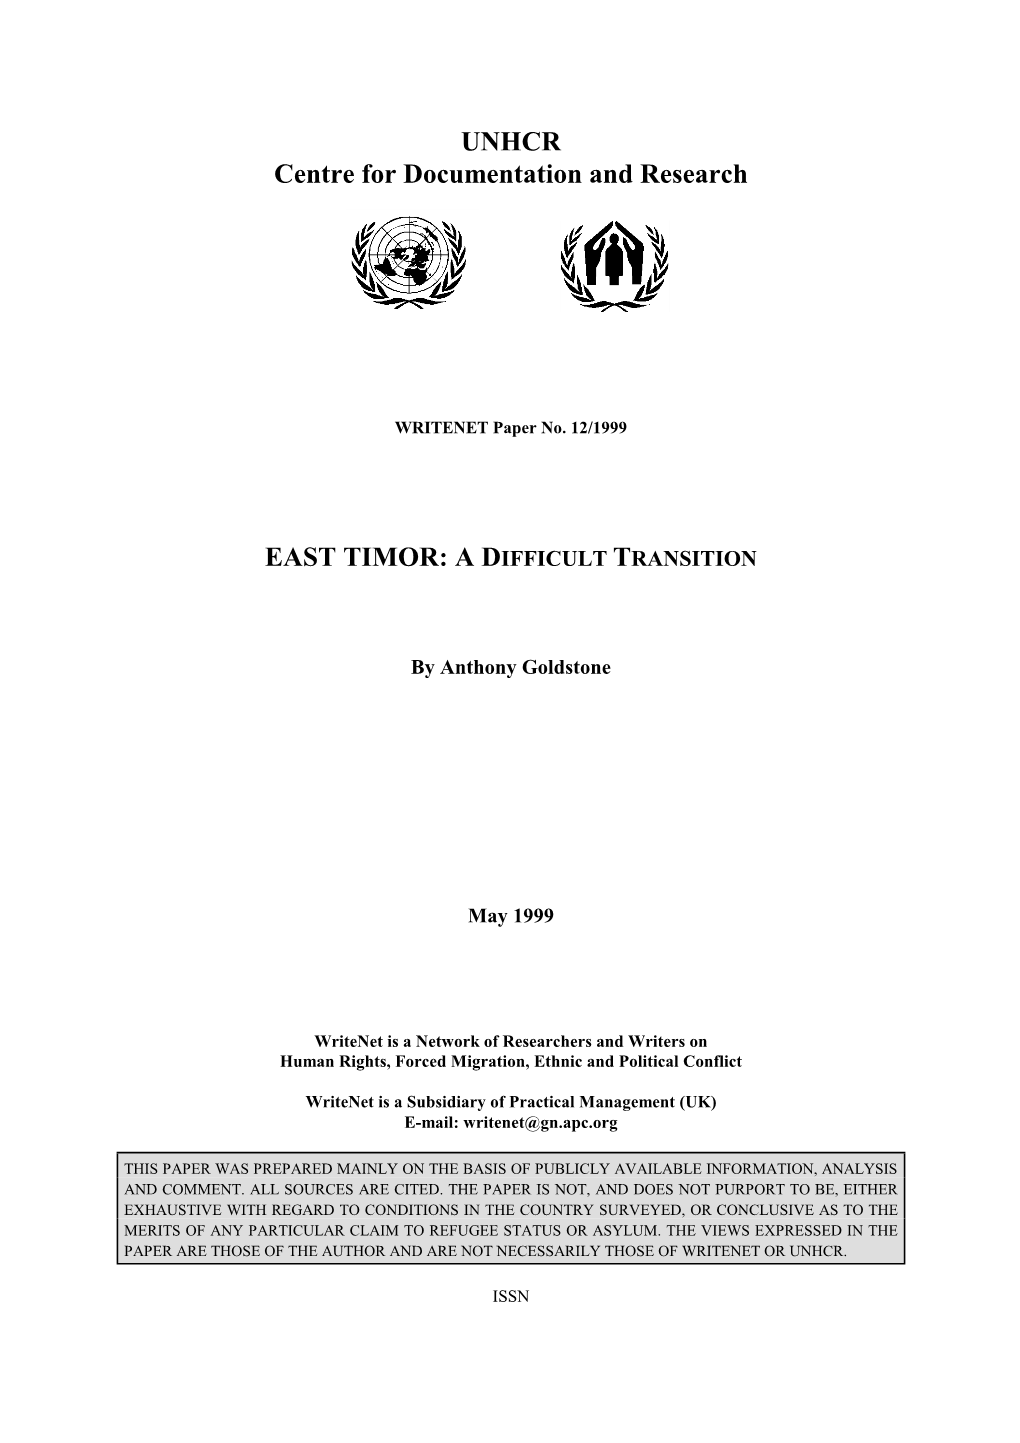 East Timor: a Difficult Transition